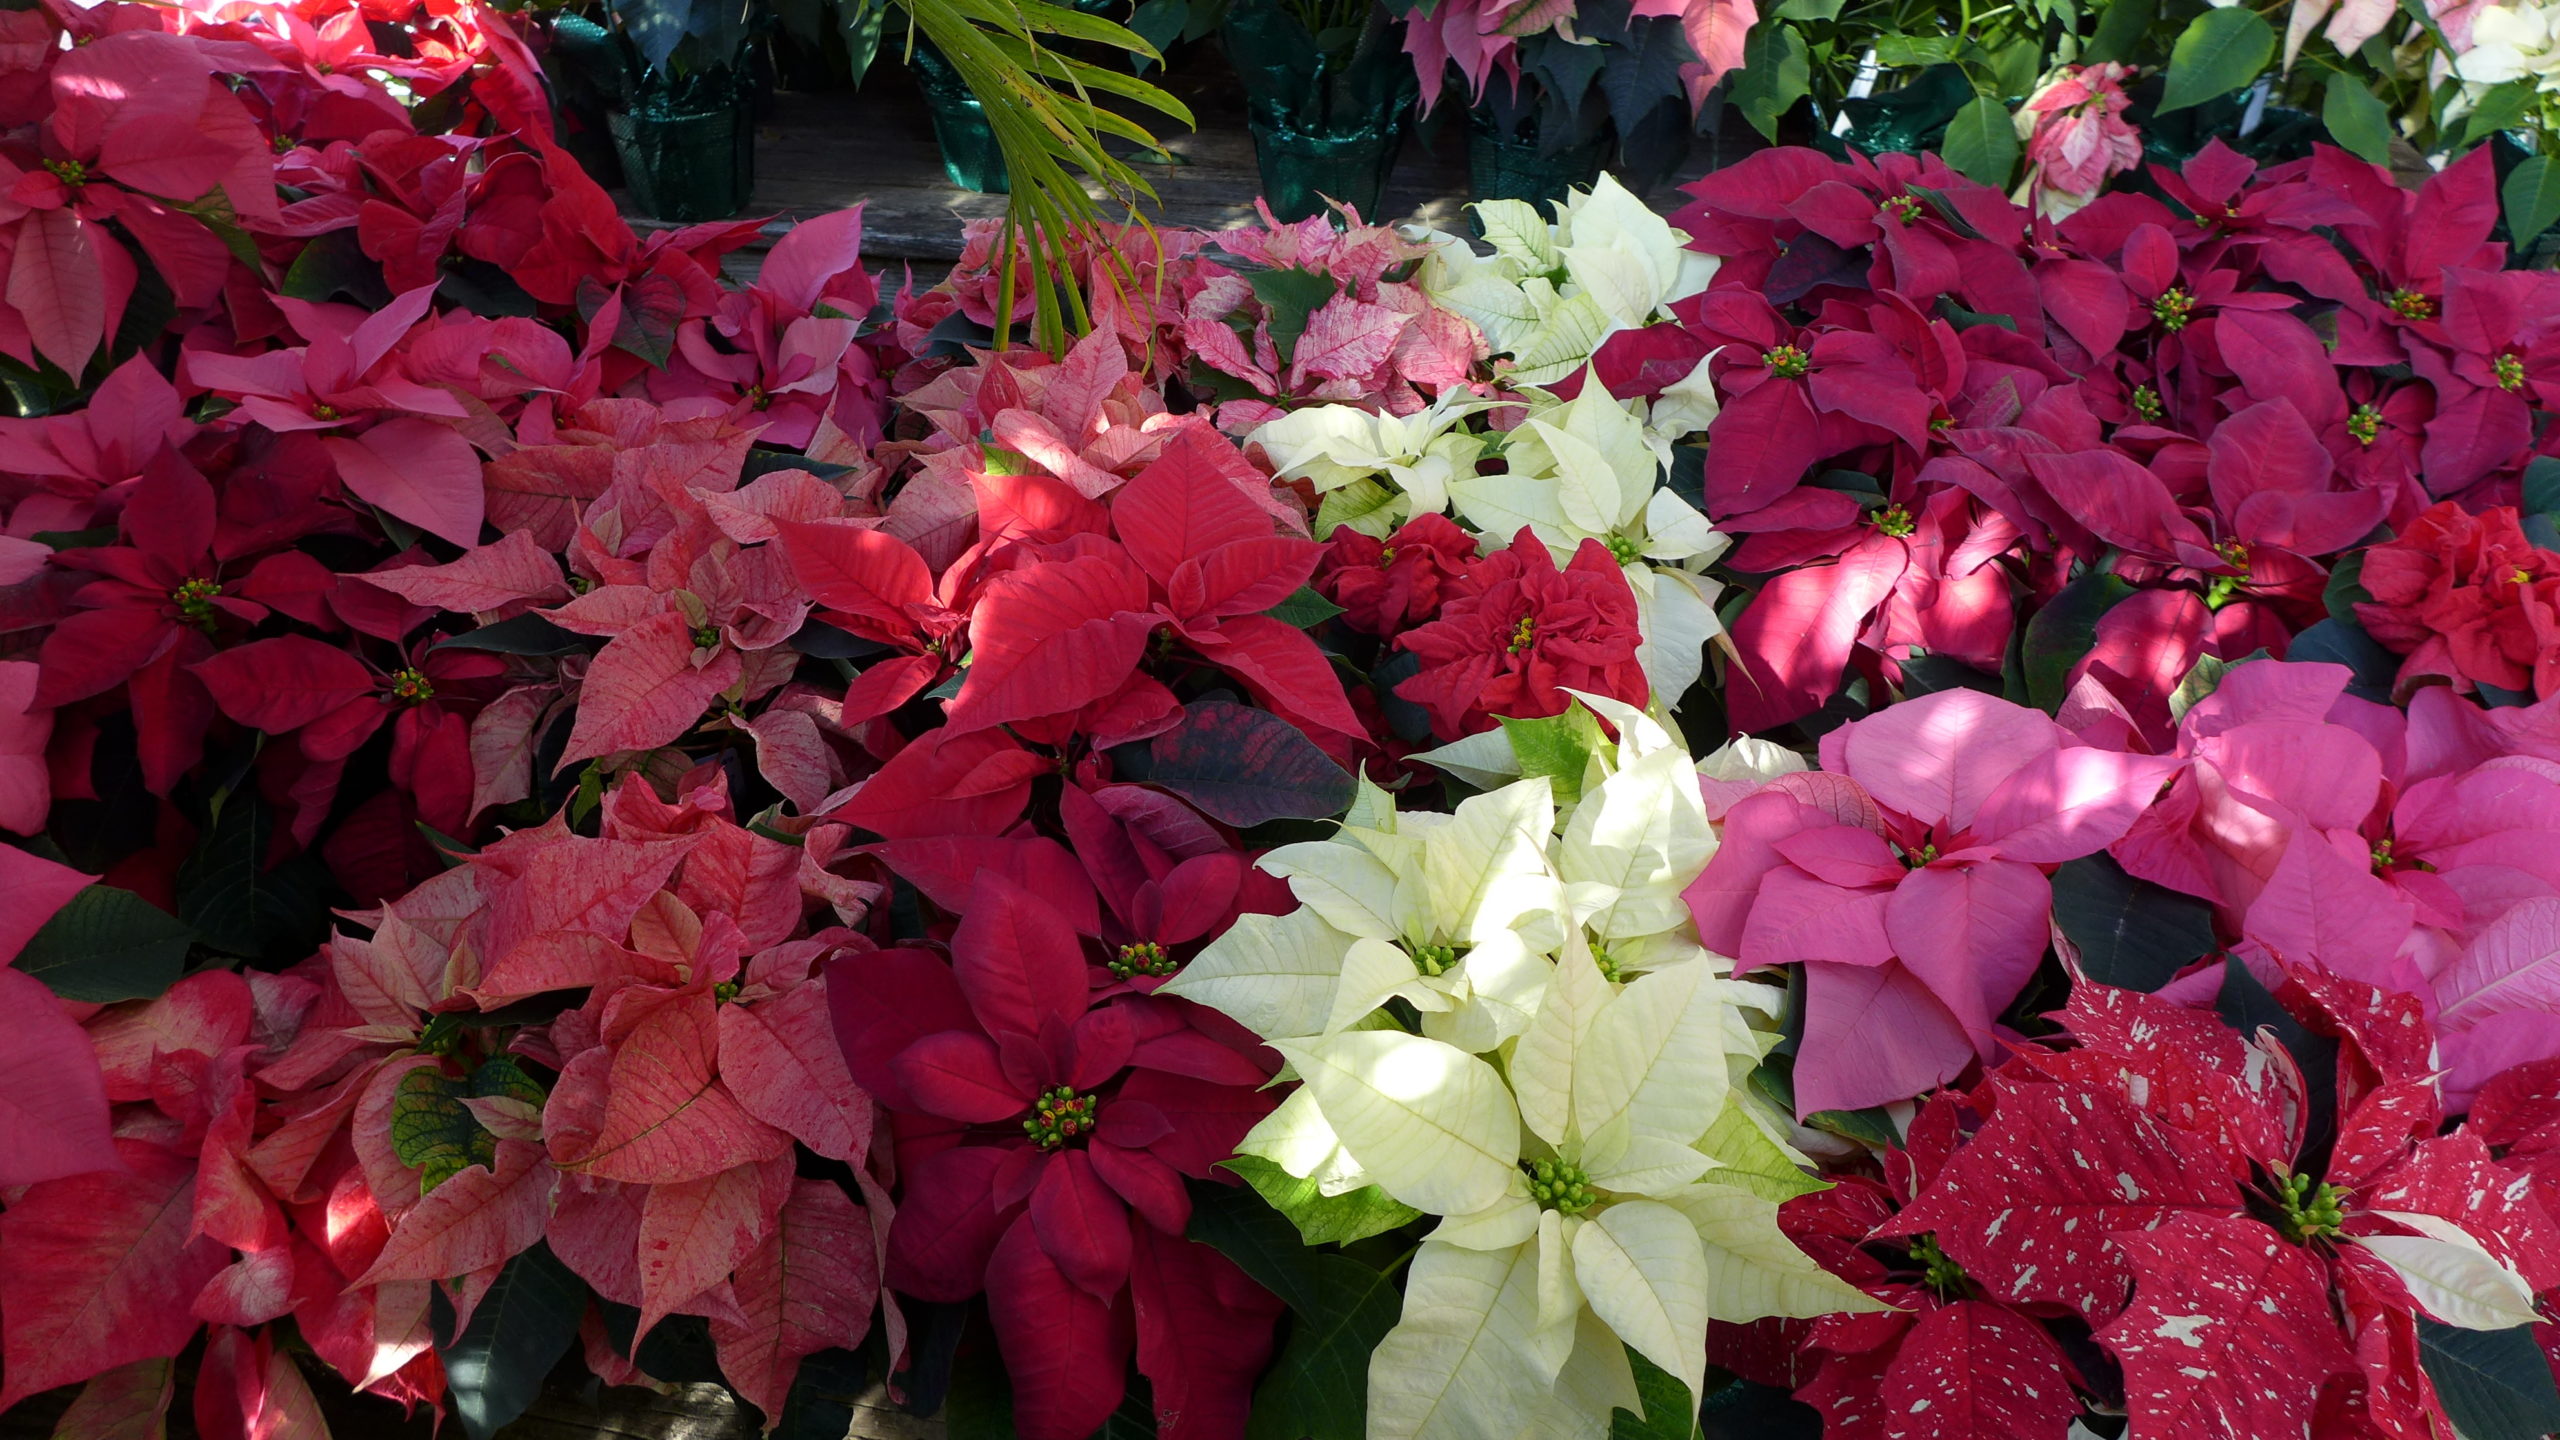 Each of these poinsettias has colored 